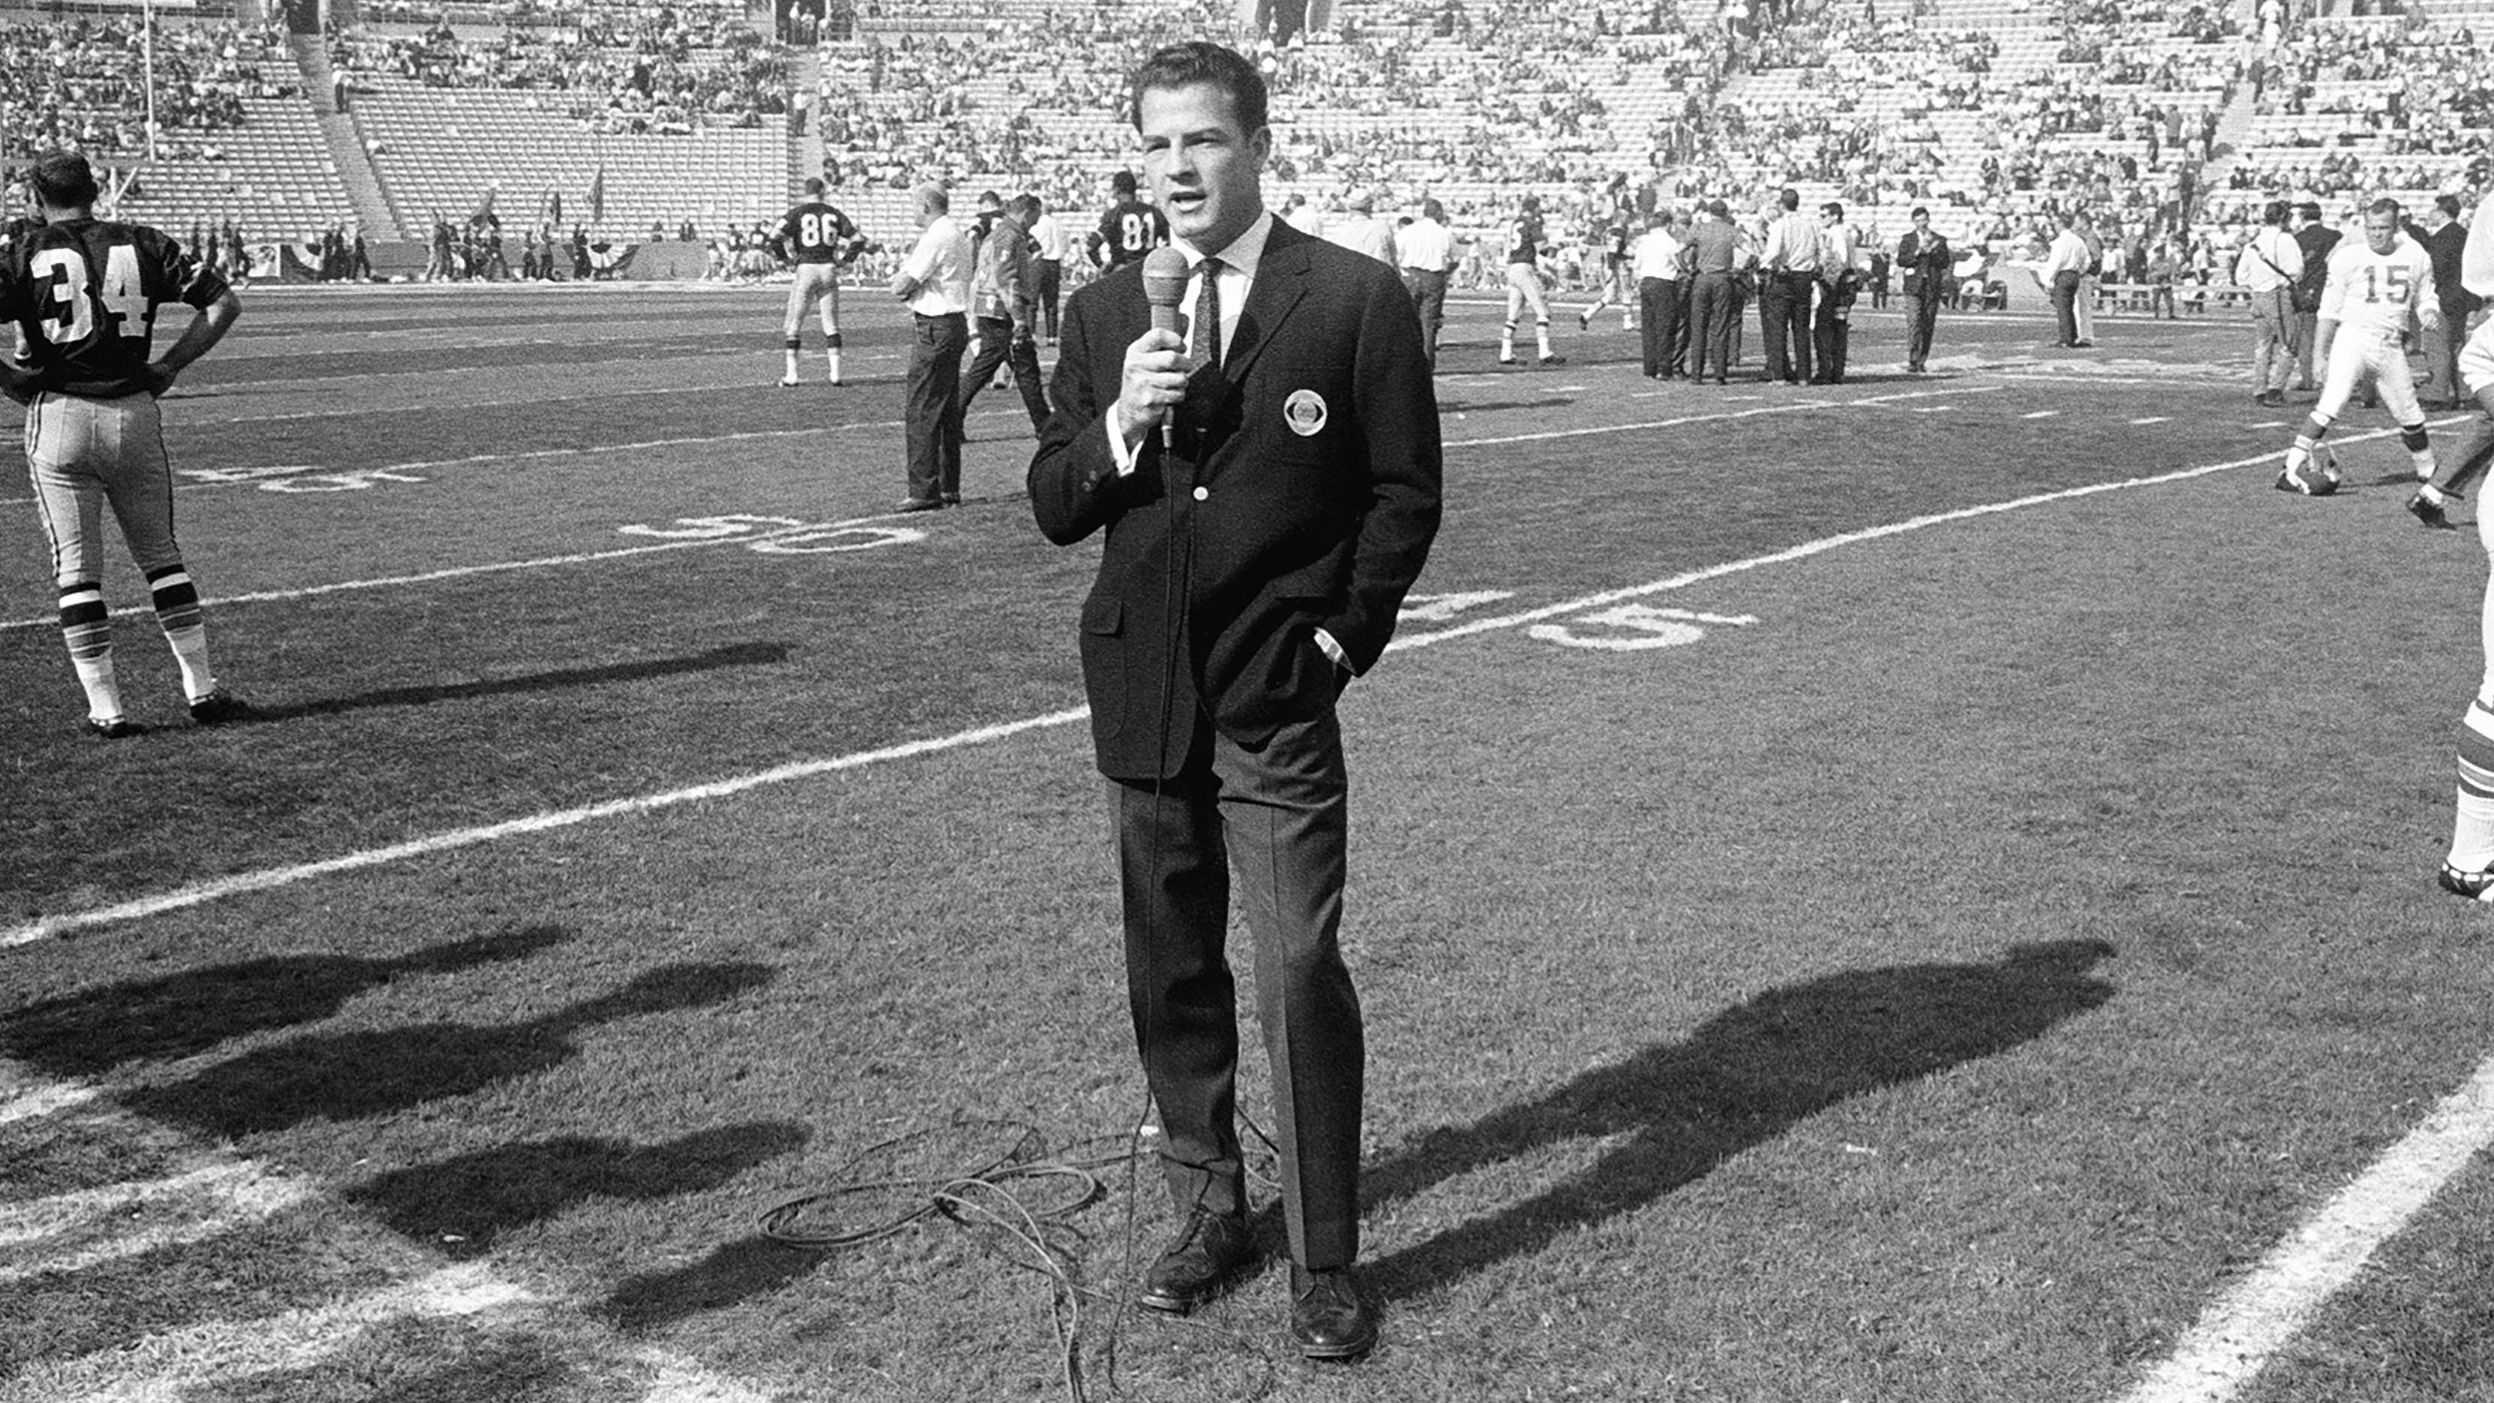 CBS commentator Frank Gifford works on the field before the game. The game was televised by both CBS and NBC. CBS held the rights to NFL games, while NBC had the rights to AFL games.